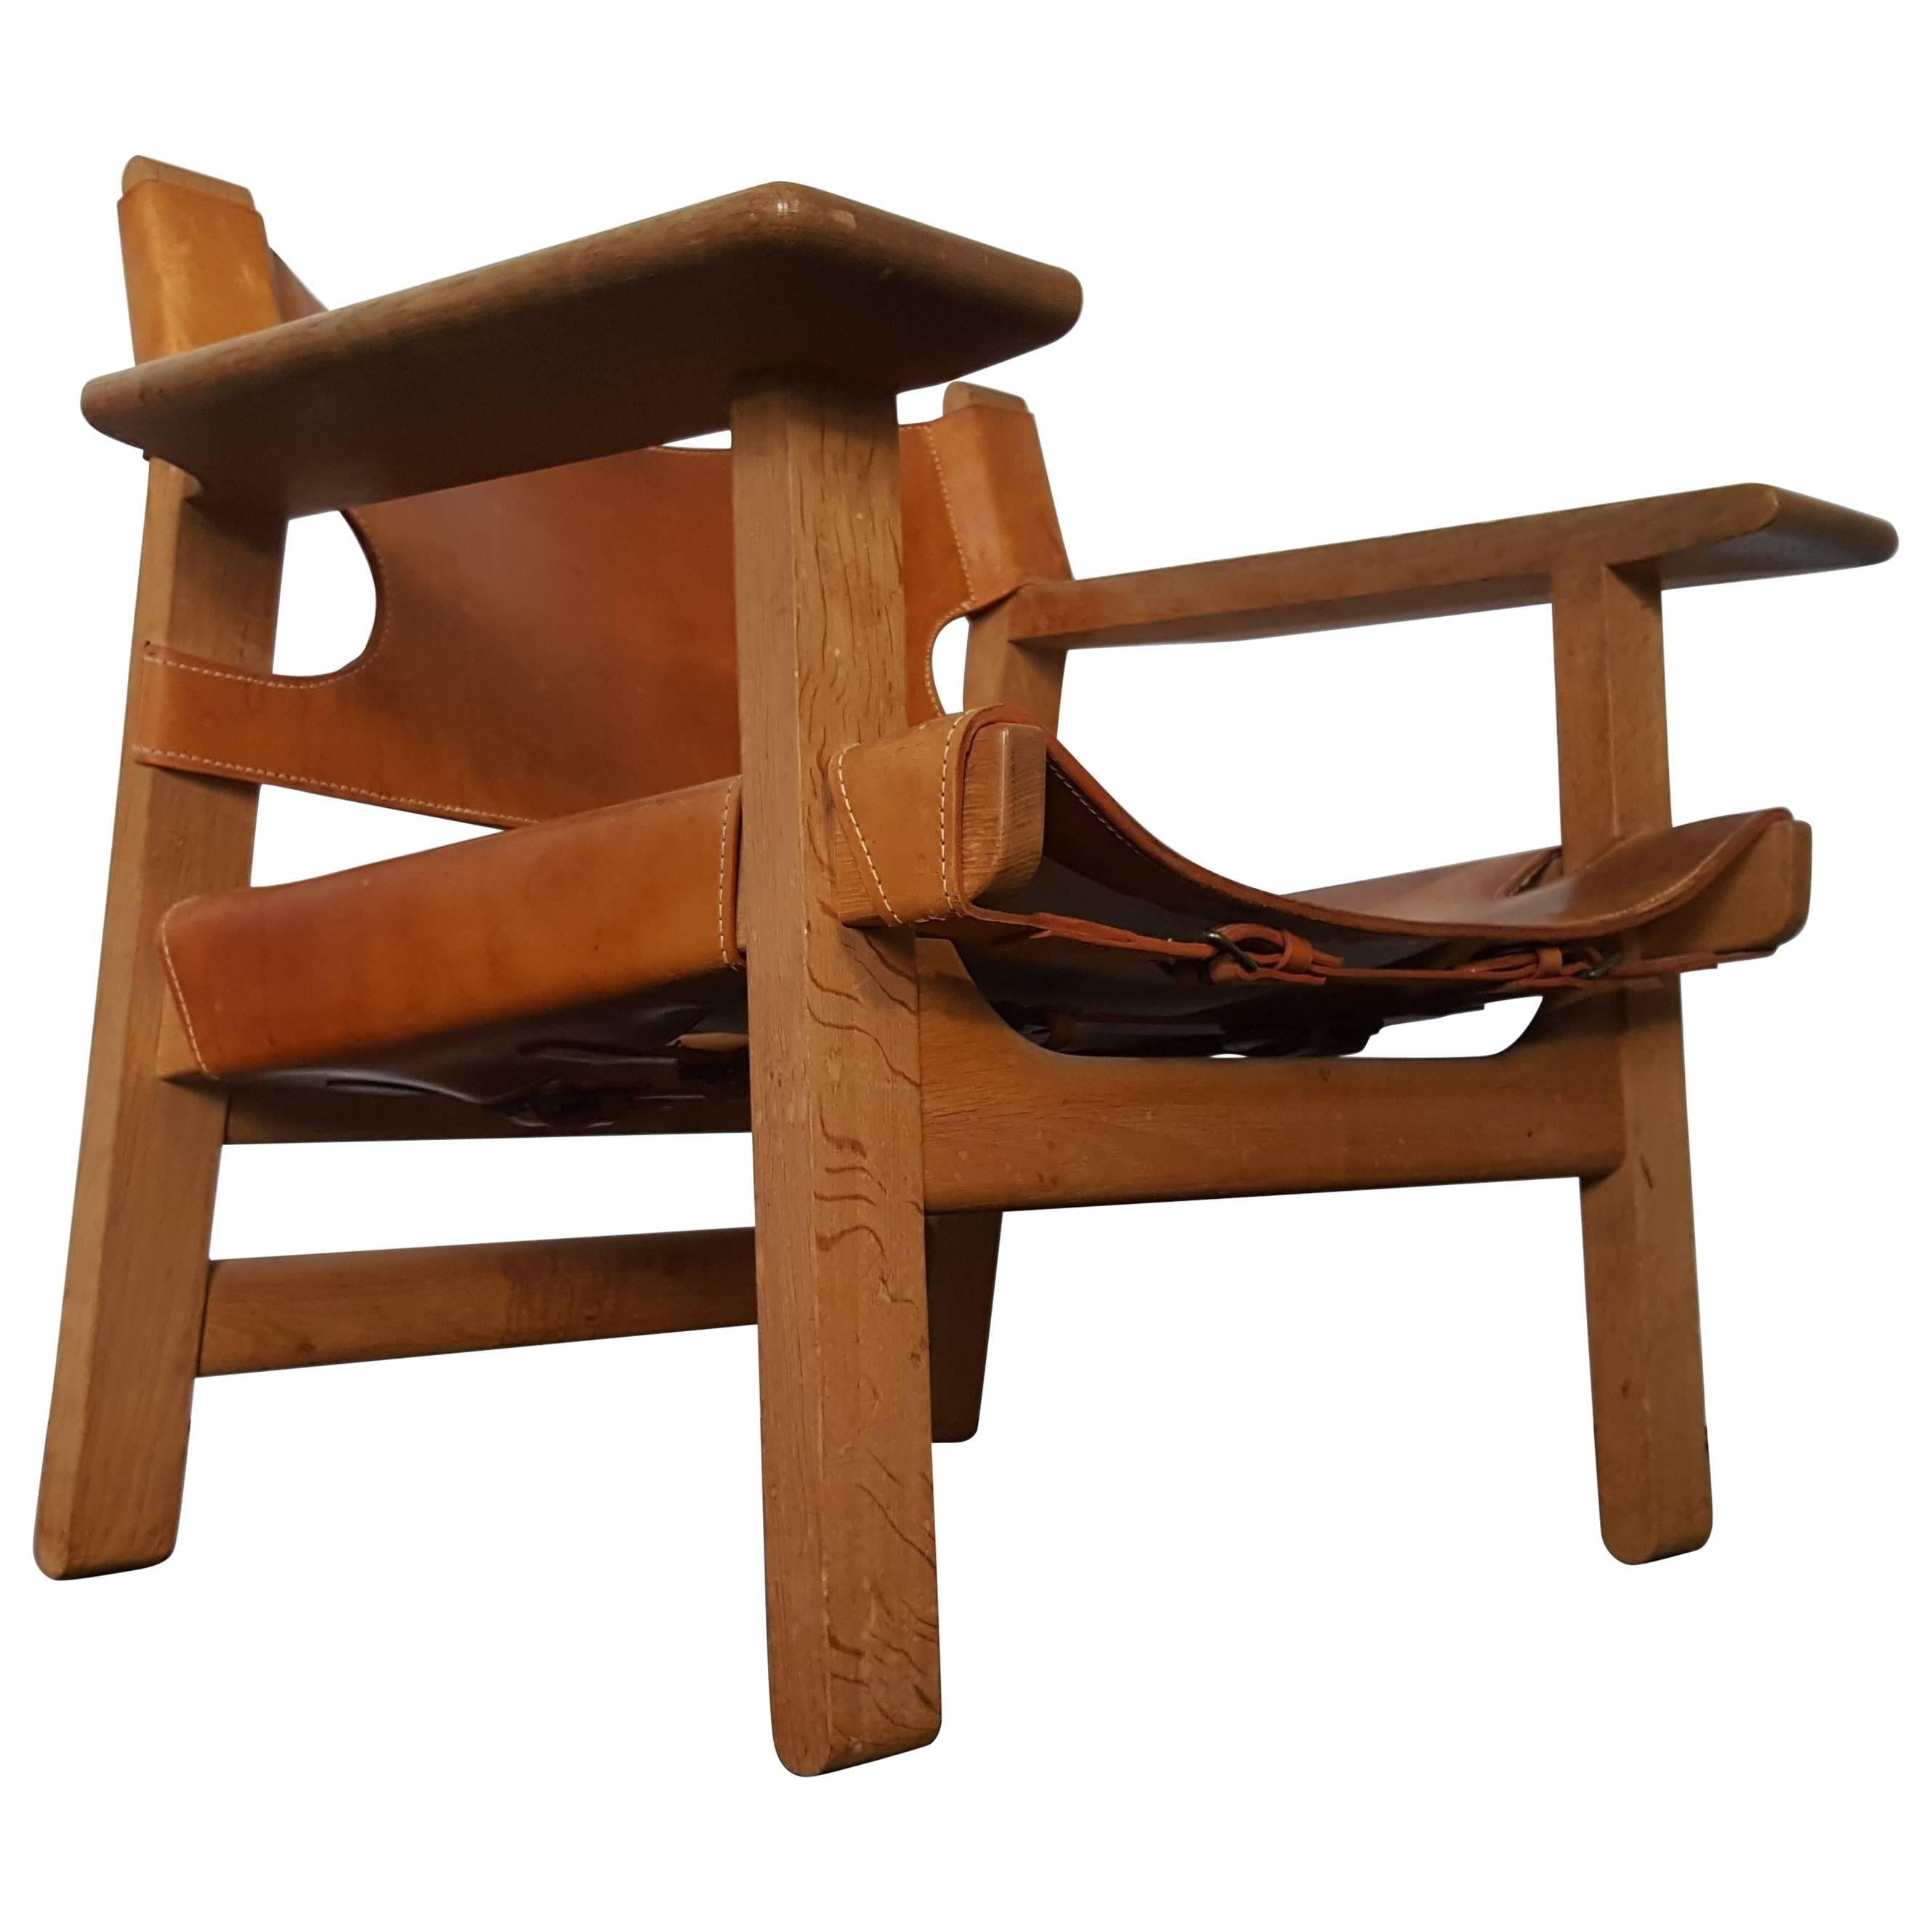 Børge Mogensen "Spanish" Chair, Designed 1958, Produced by Fredericia Stolefabri